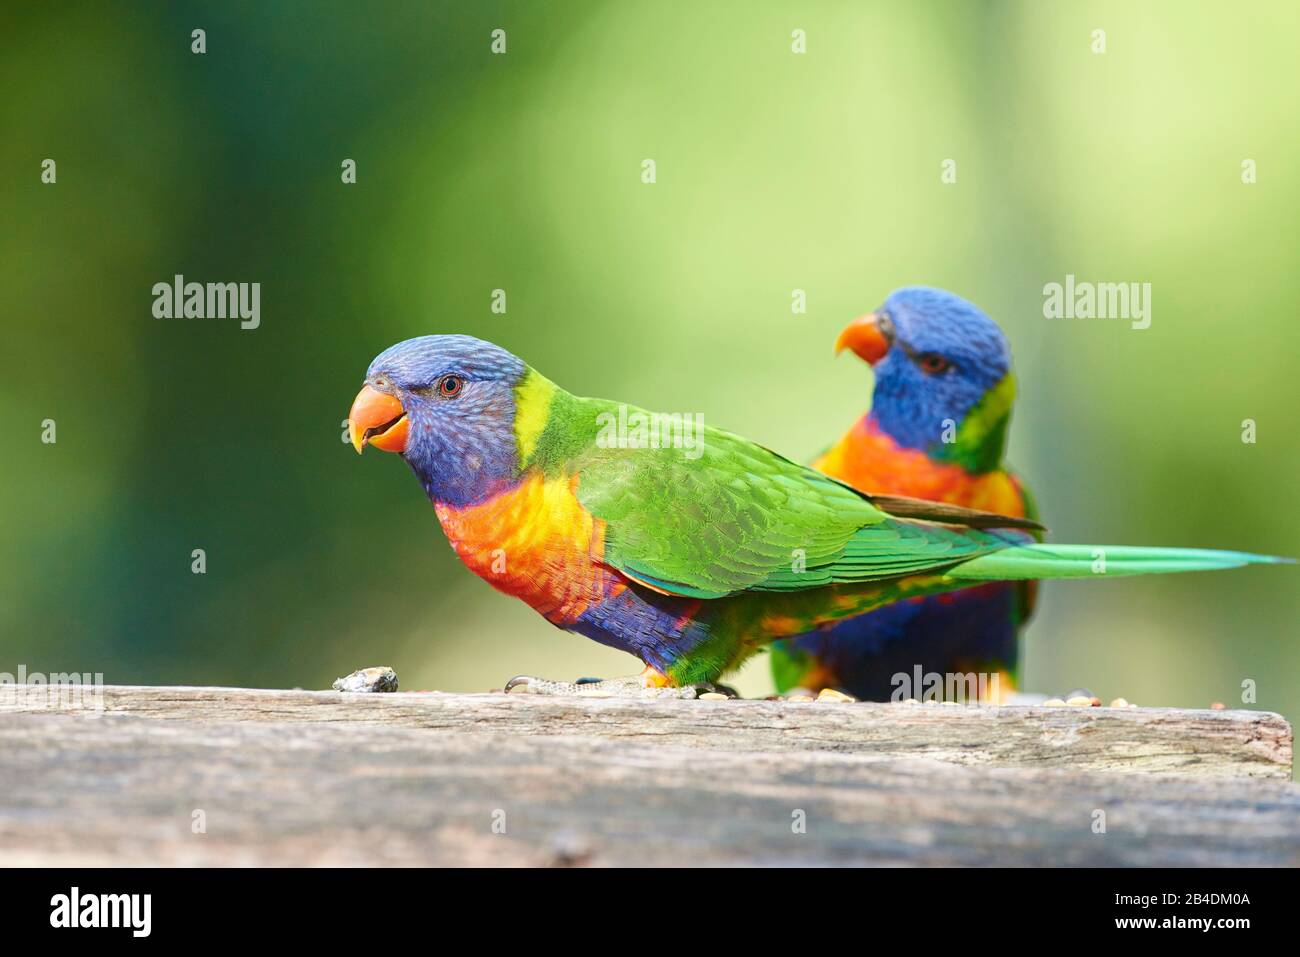 All-color lory or Wedge-tailed Lorikeet (Trichoglossus haematodus) in a forest at pebbly beach, murramarang national park, sit, victoria, australia Stock Photo